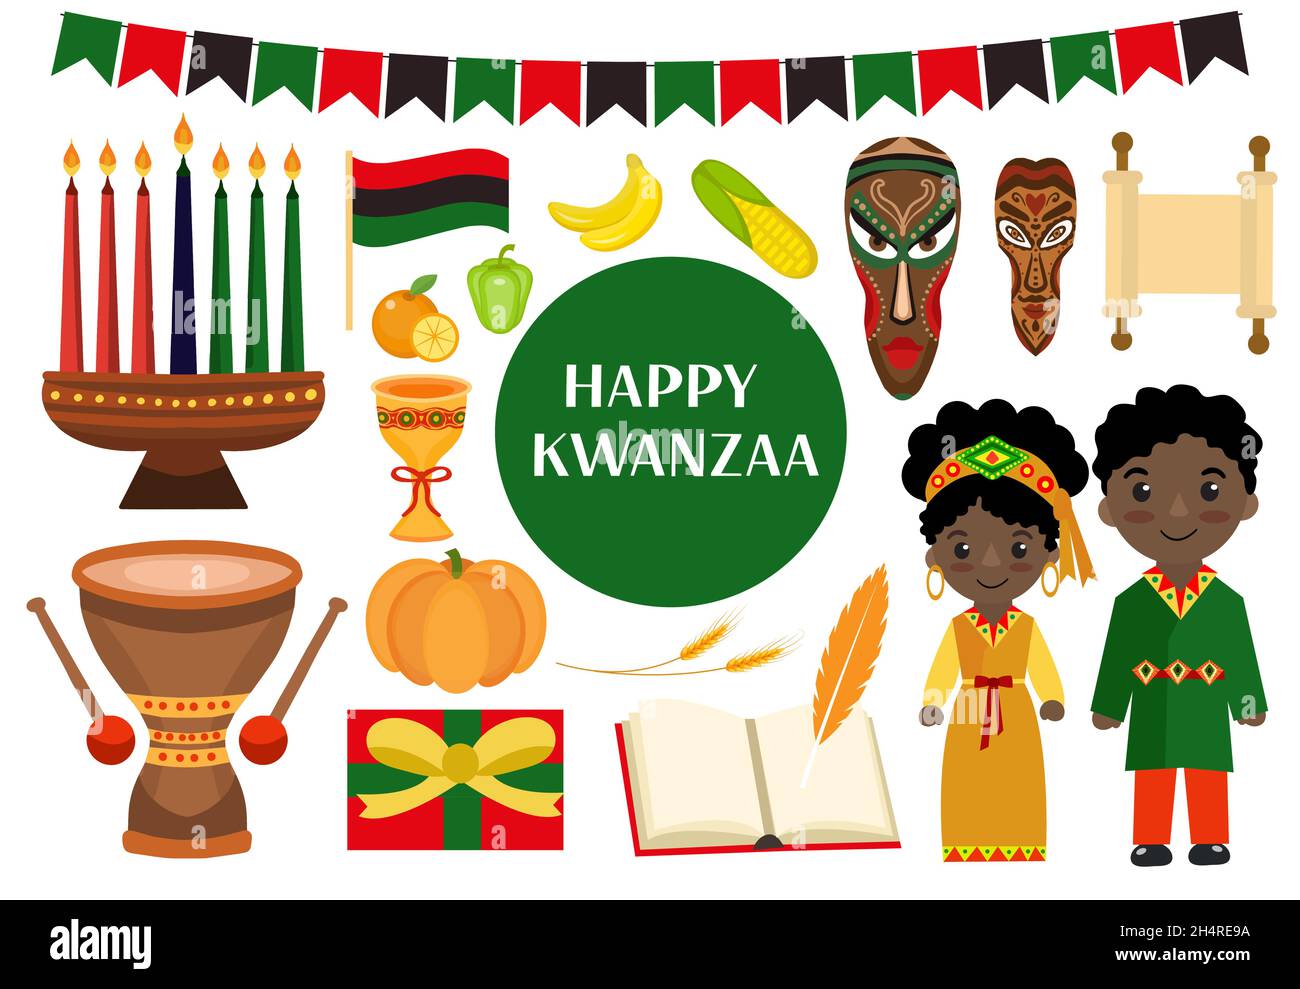 Kwanzaa icons set. African American holiday festival collection clip art hand drawing style with kinara, tribal masks, drum. Vector illustration Stock Vector